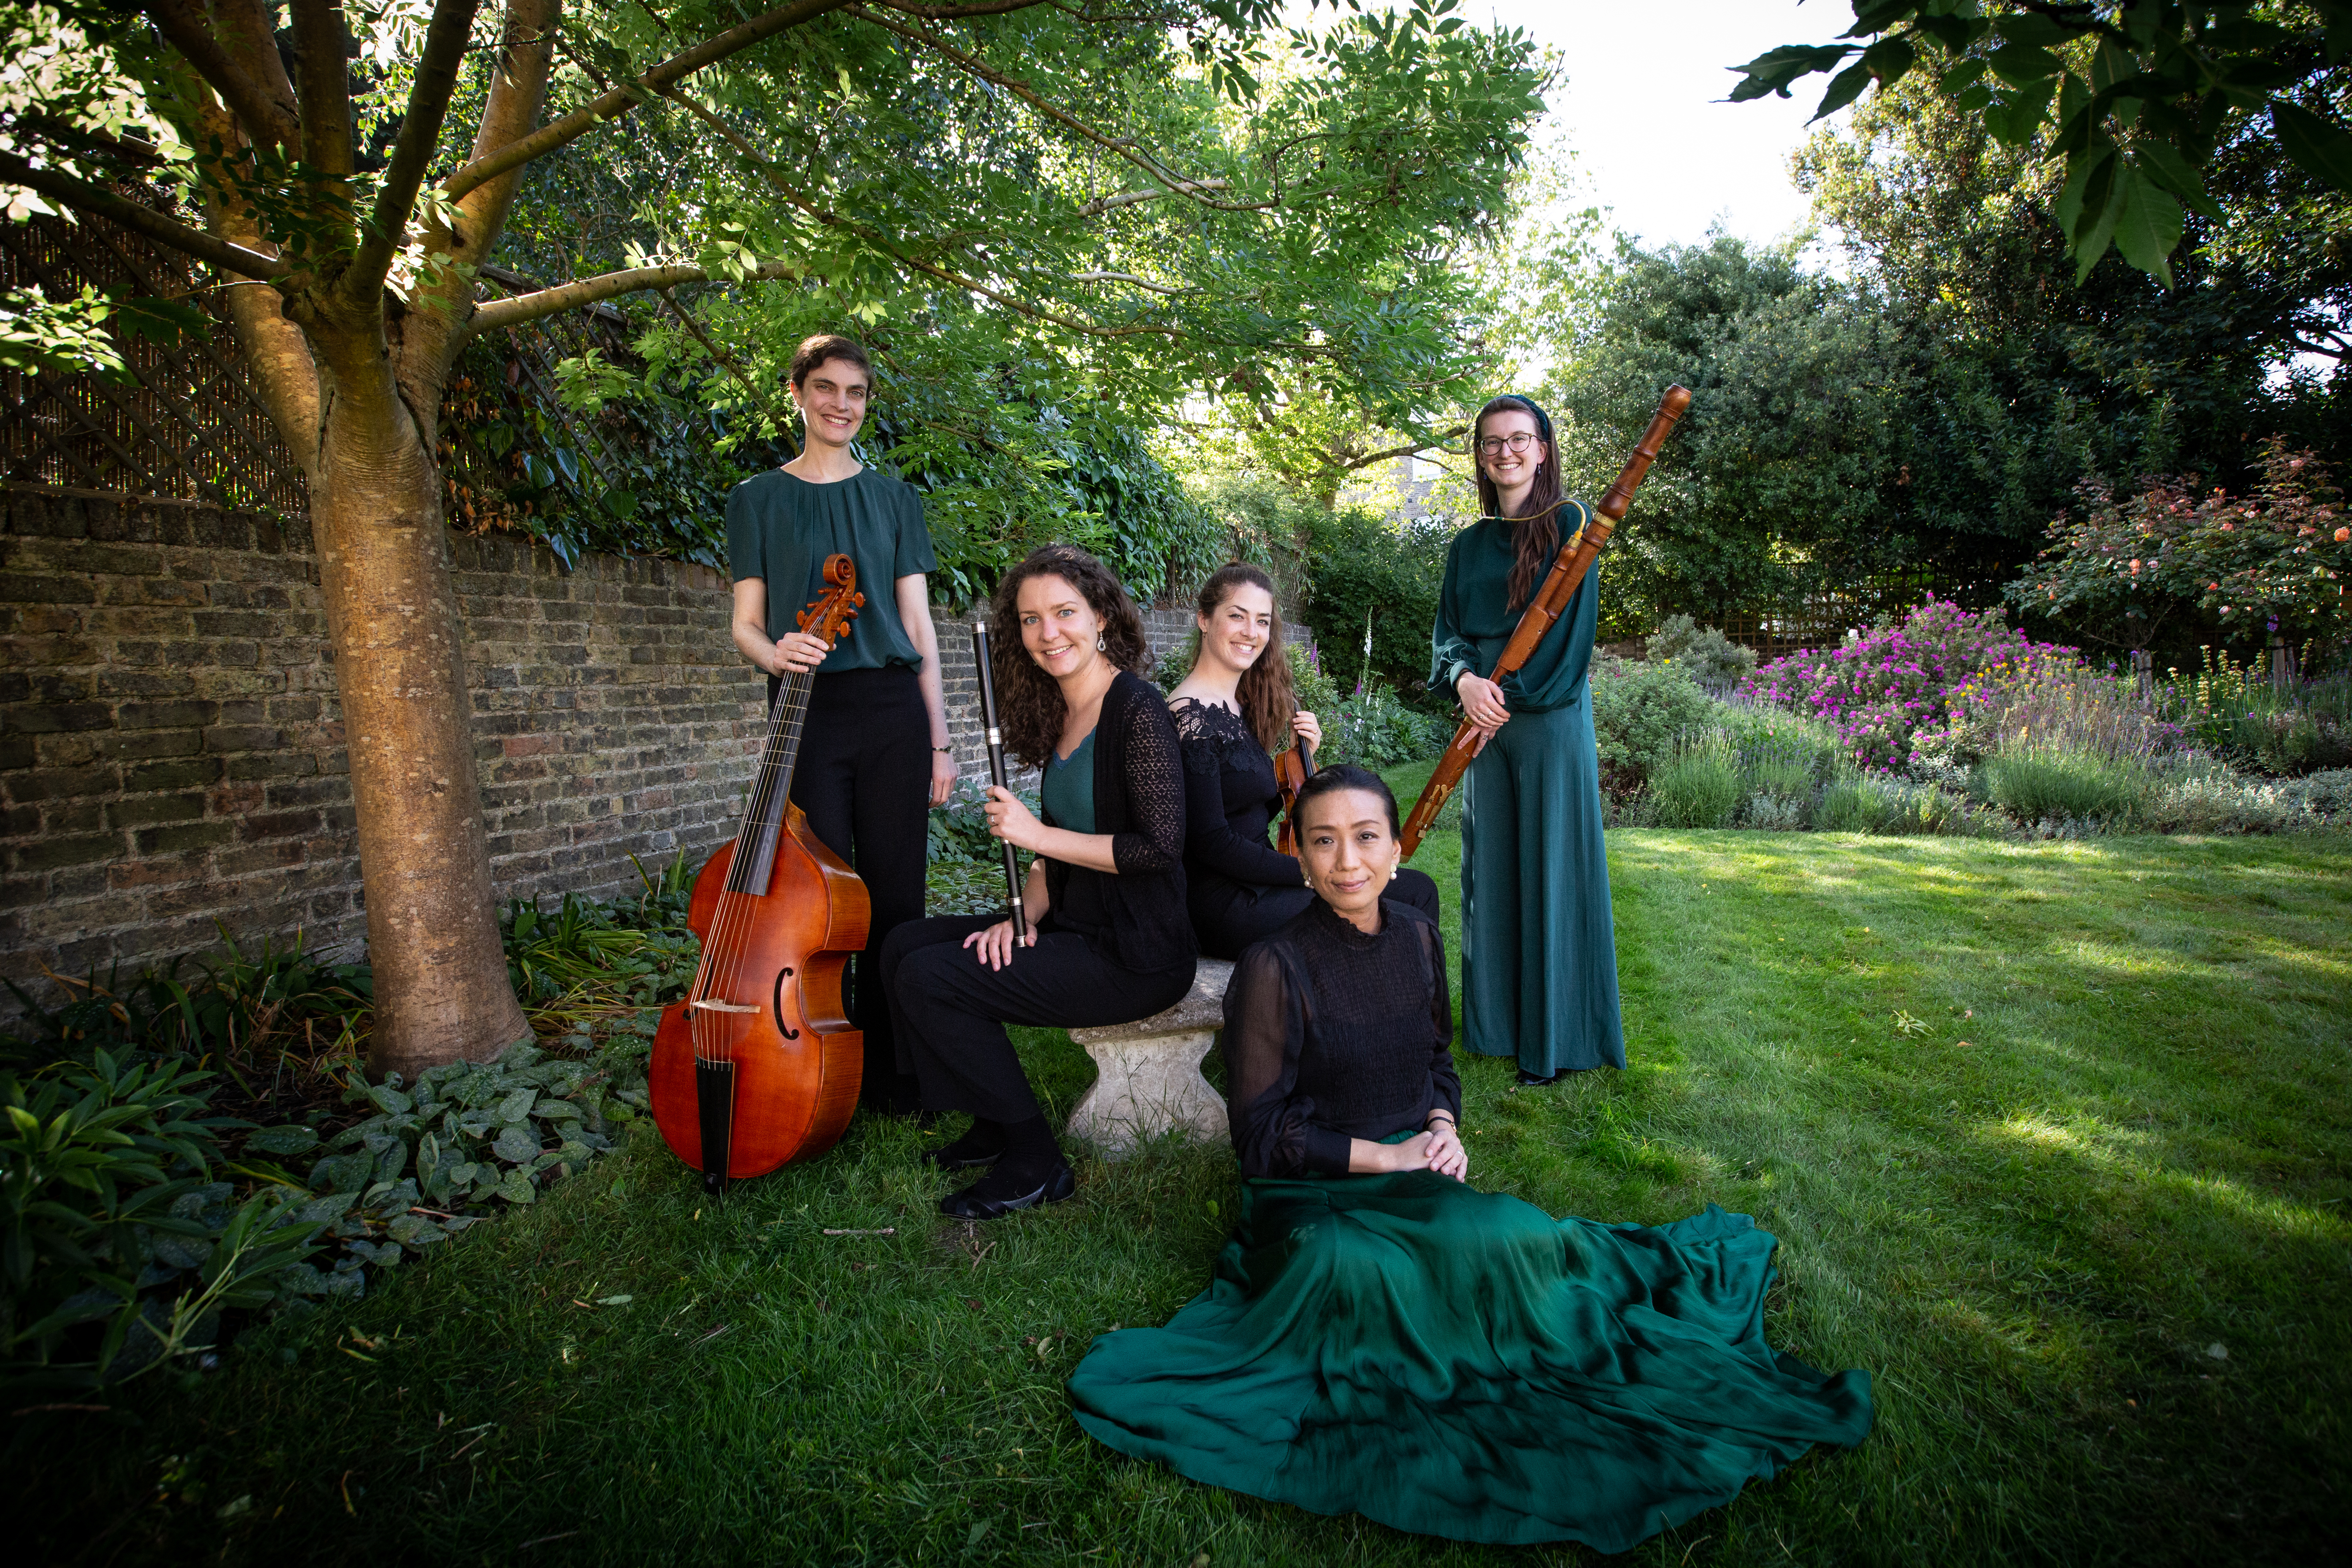 Ensemble Moliere pose with their instruments on the grass of a garden next to a tree